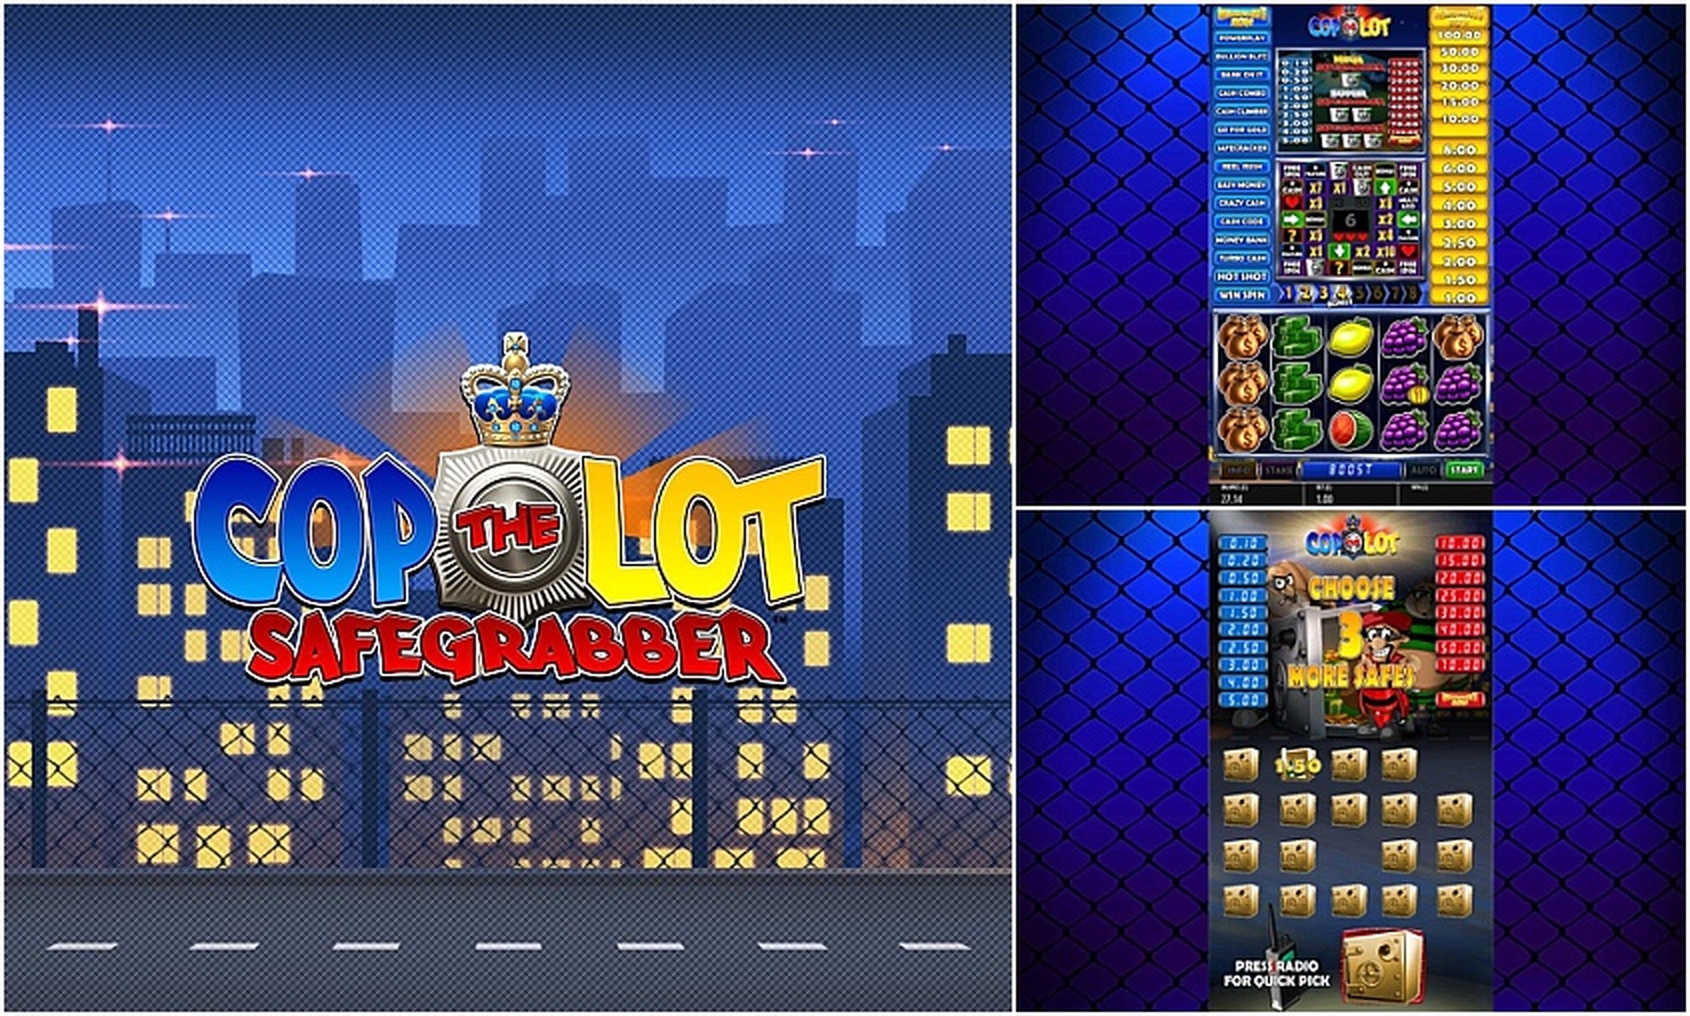 The Cop the Lot Online Slot Demo Game by Blueprint Gaming